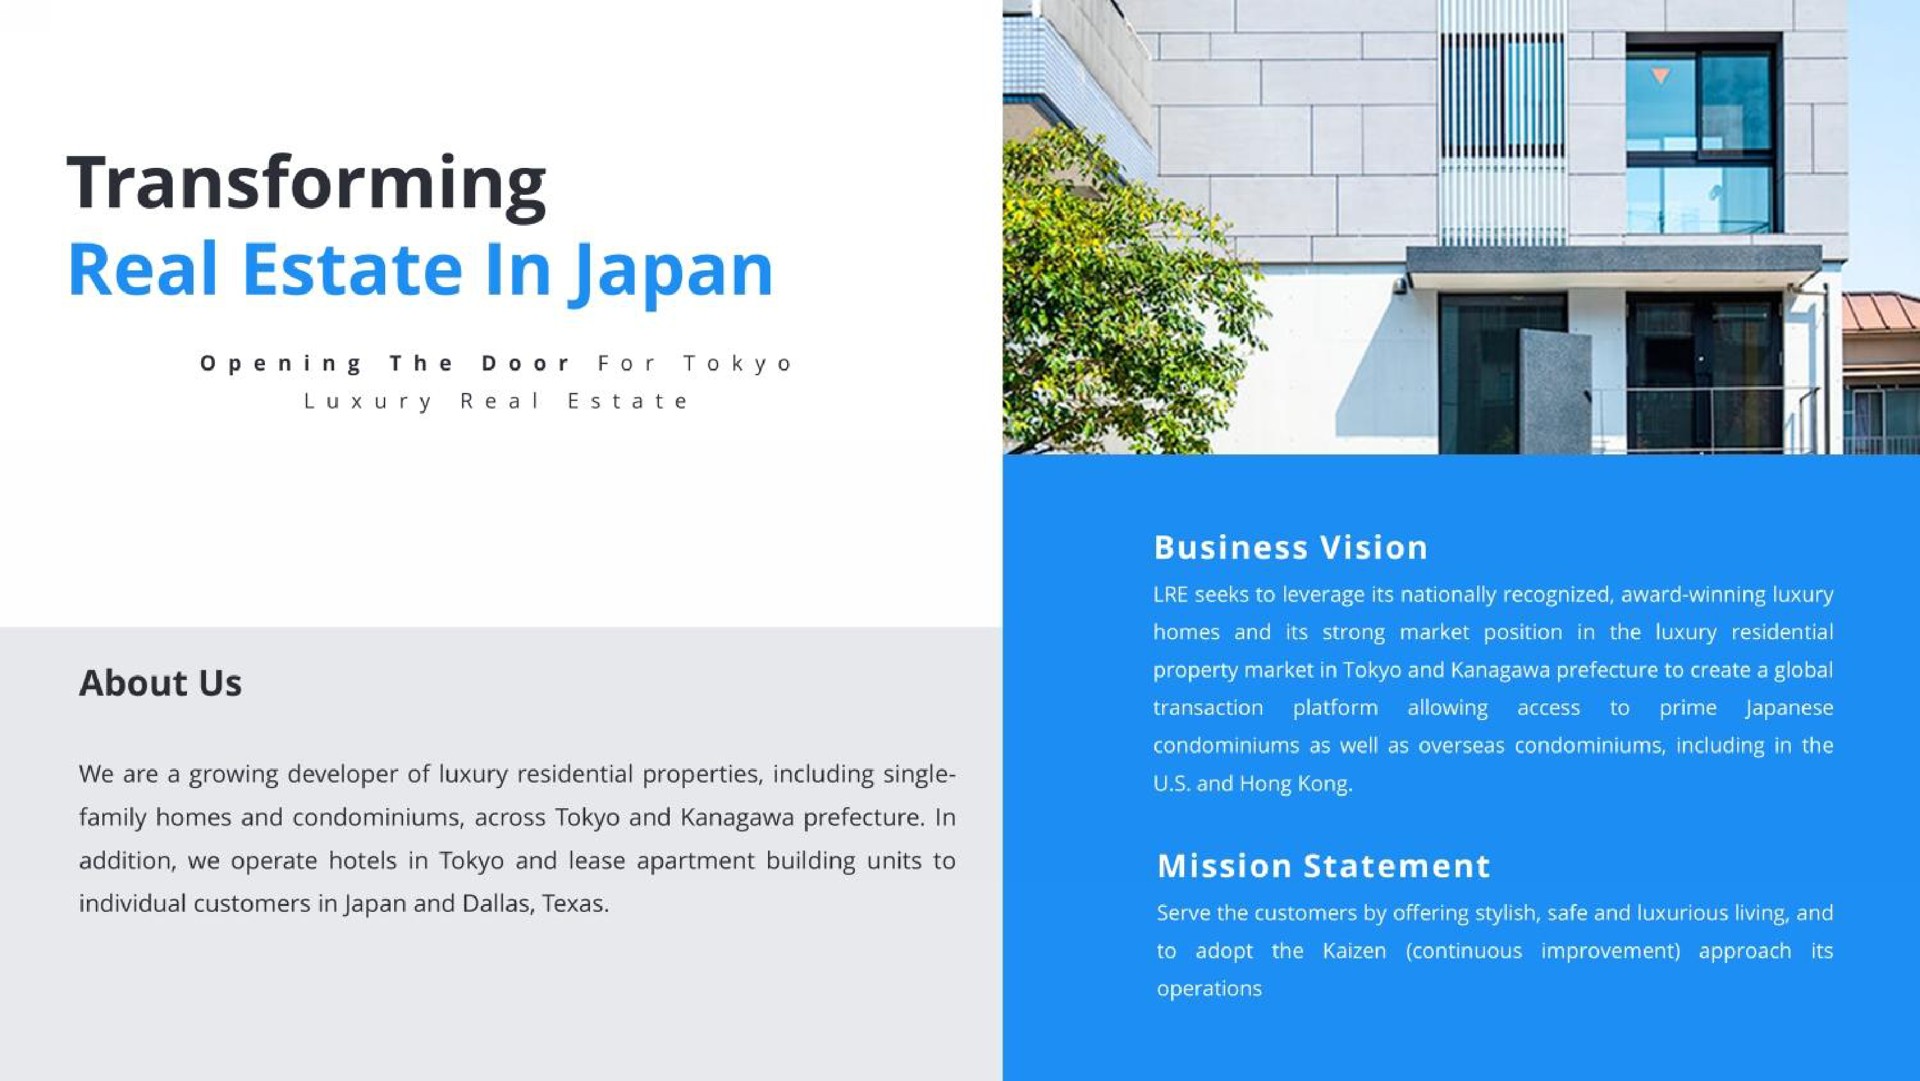 an i transforming real estate in japan about us | Lead Real Estate Co